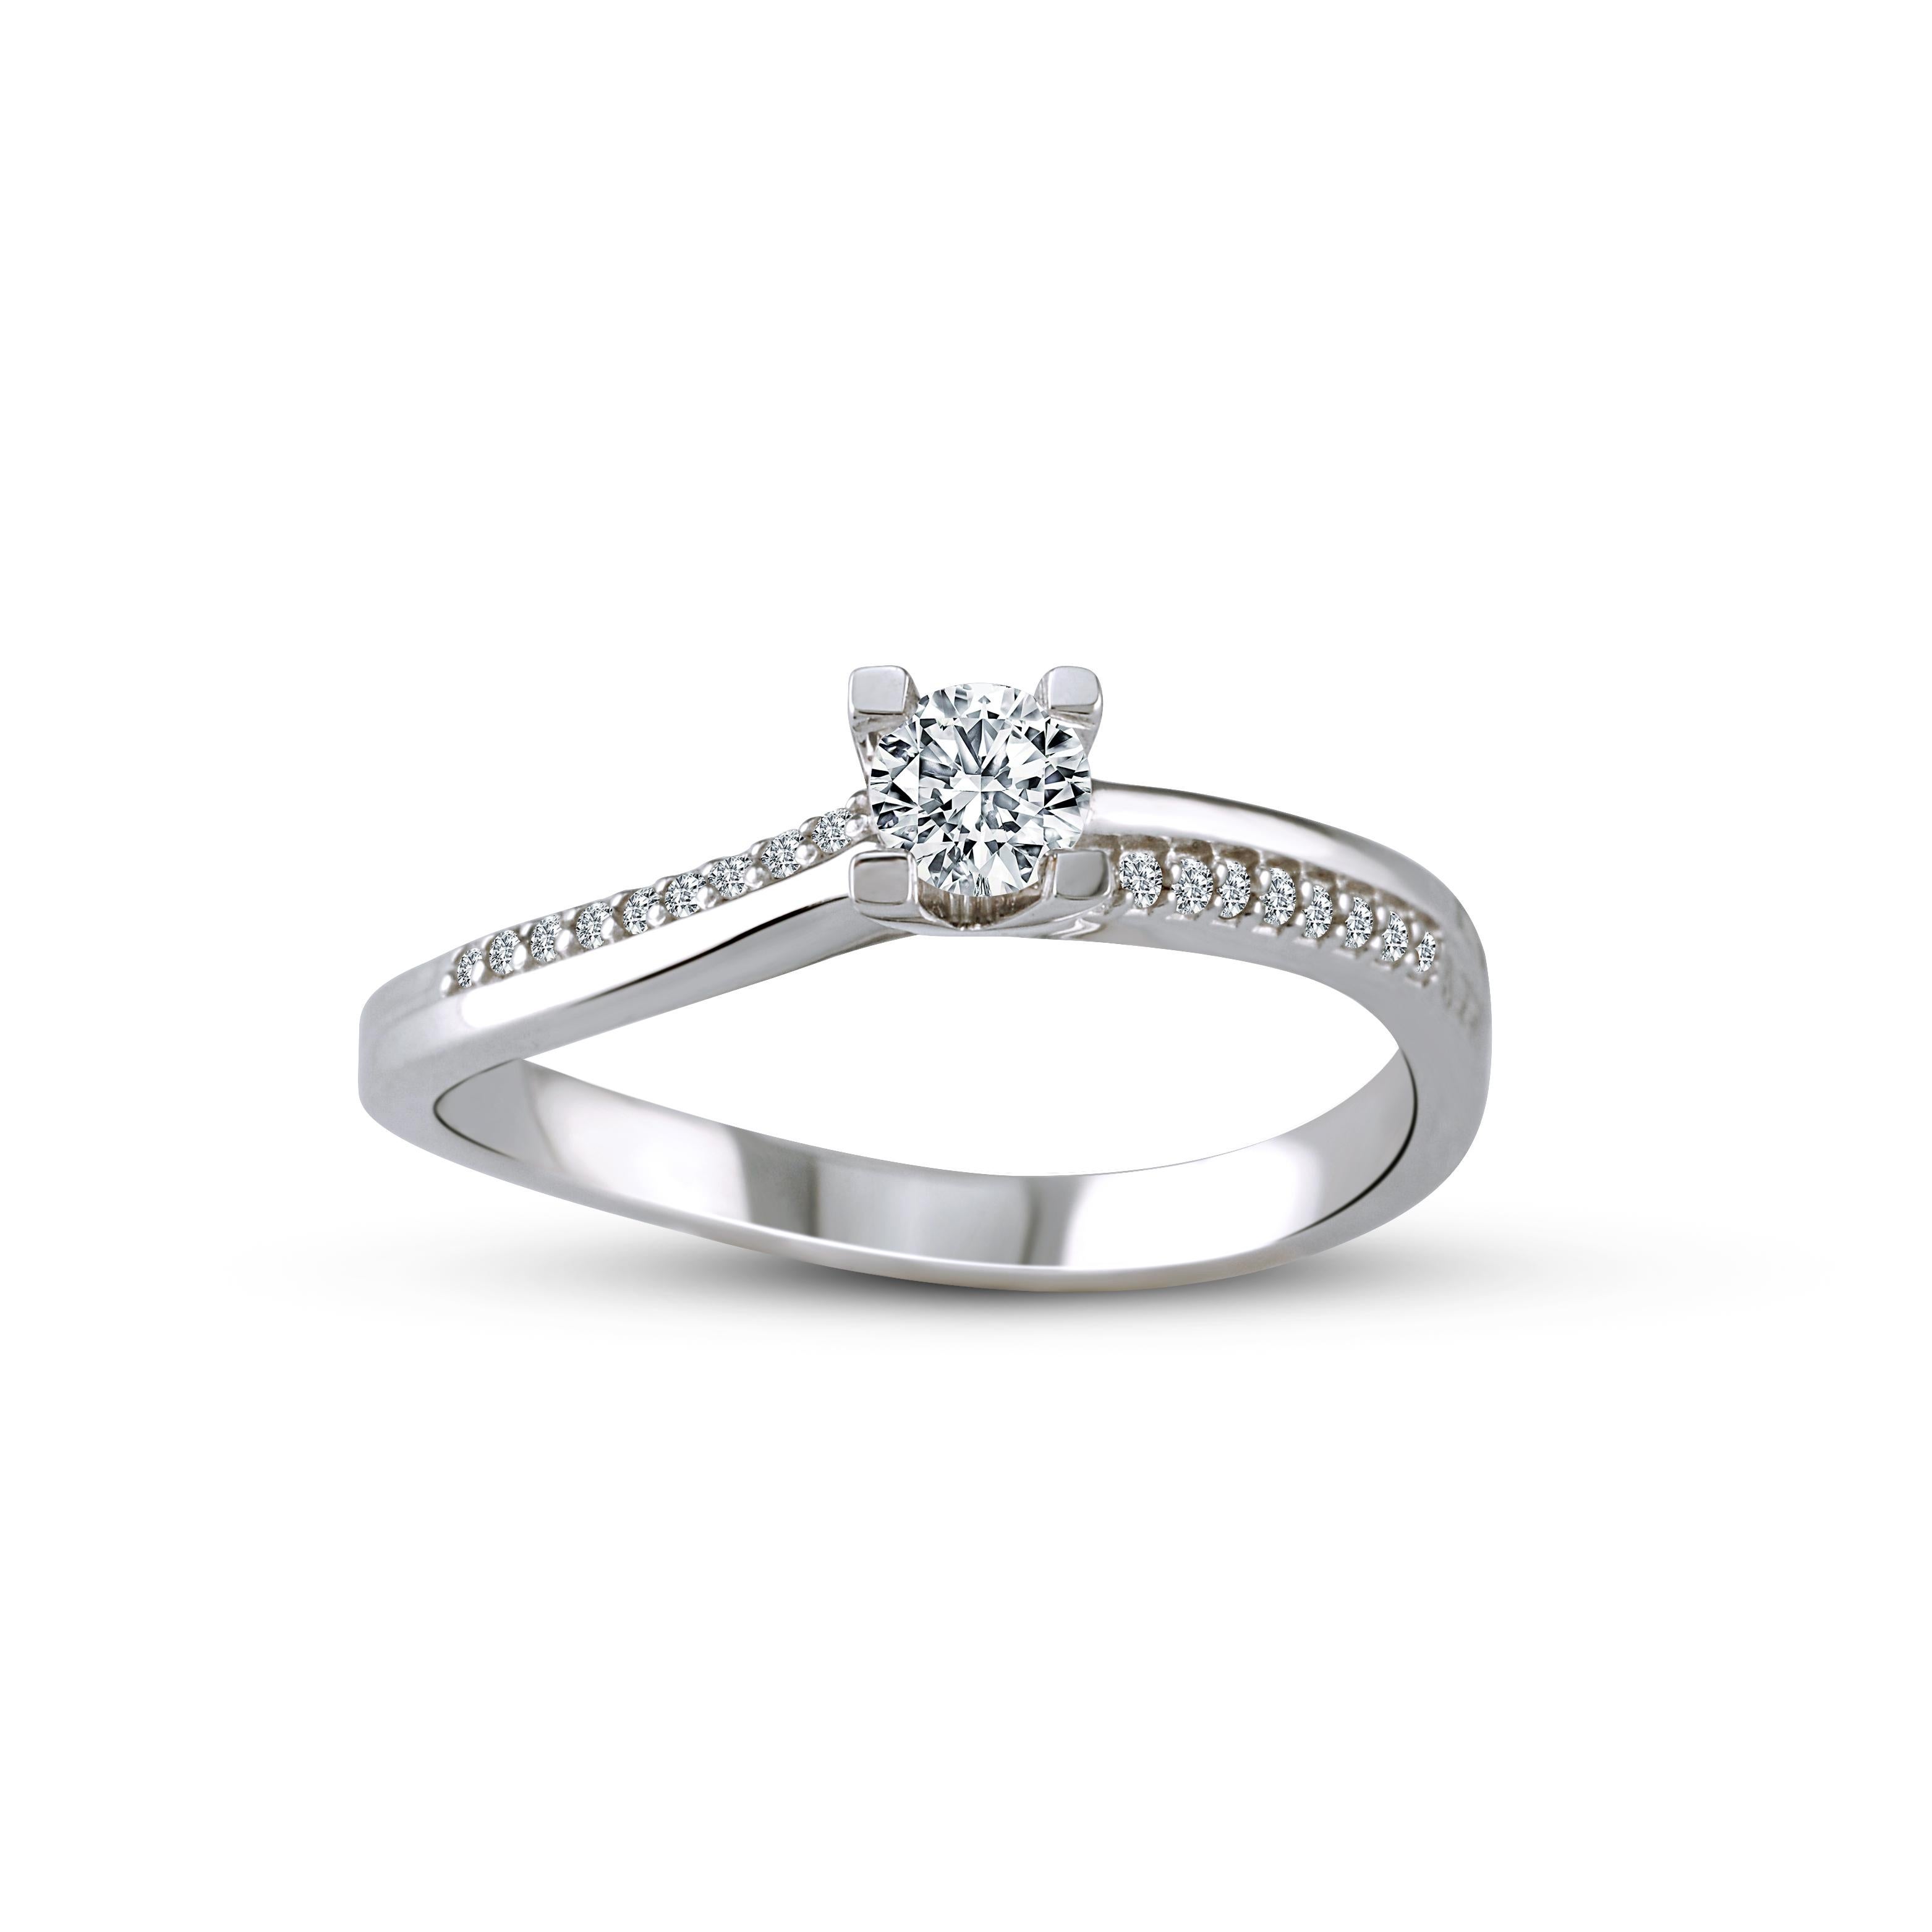 Beautiful Wedding Ring in 18K white gold with Round-cut diamonds.

MATERIAL
◘ Weight 2.82gr.
◘ 19 Round Diamonds aprox 0,07ct.
◘ 1 Round-cut Diamond aprox 0,20ct.

READY TO SHIP
*Shipment of this piece is not affected by COVID-19. 
Orders